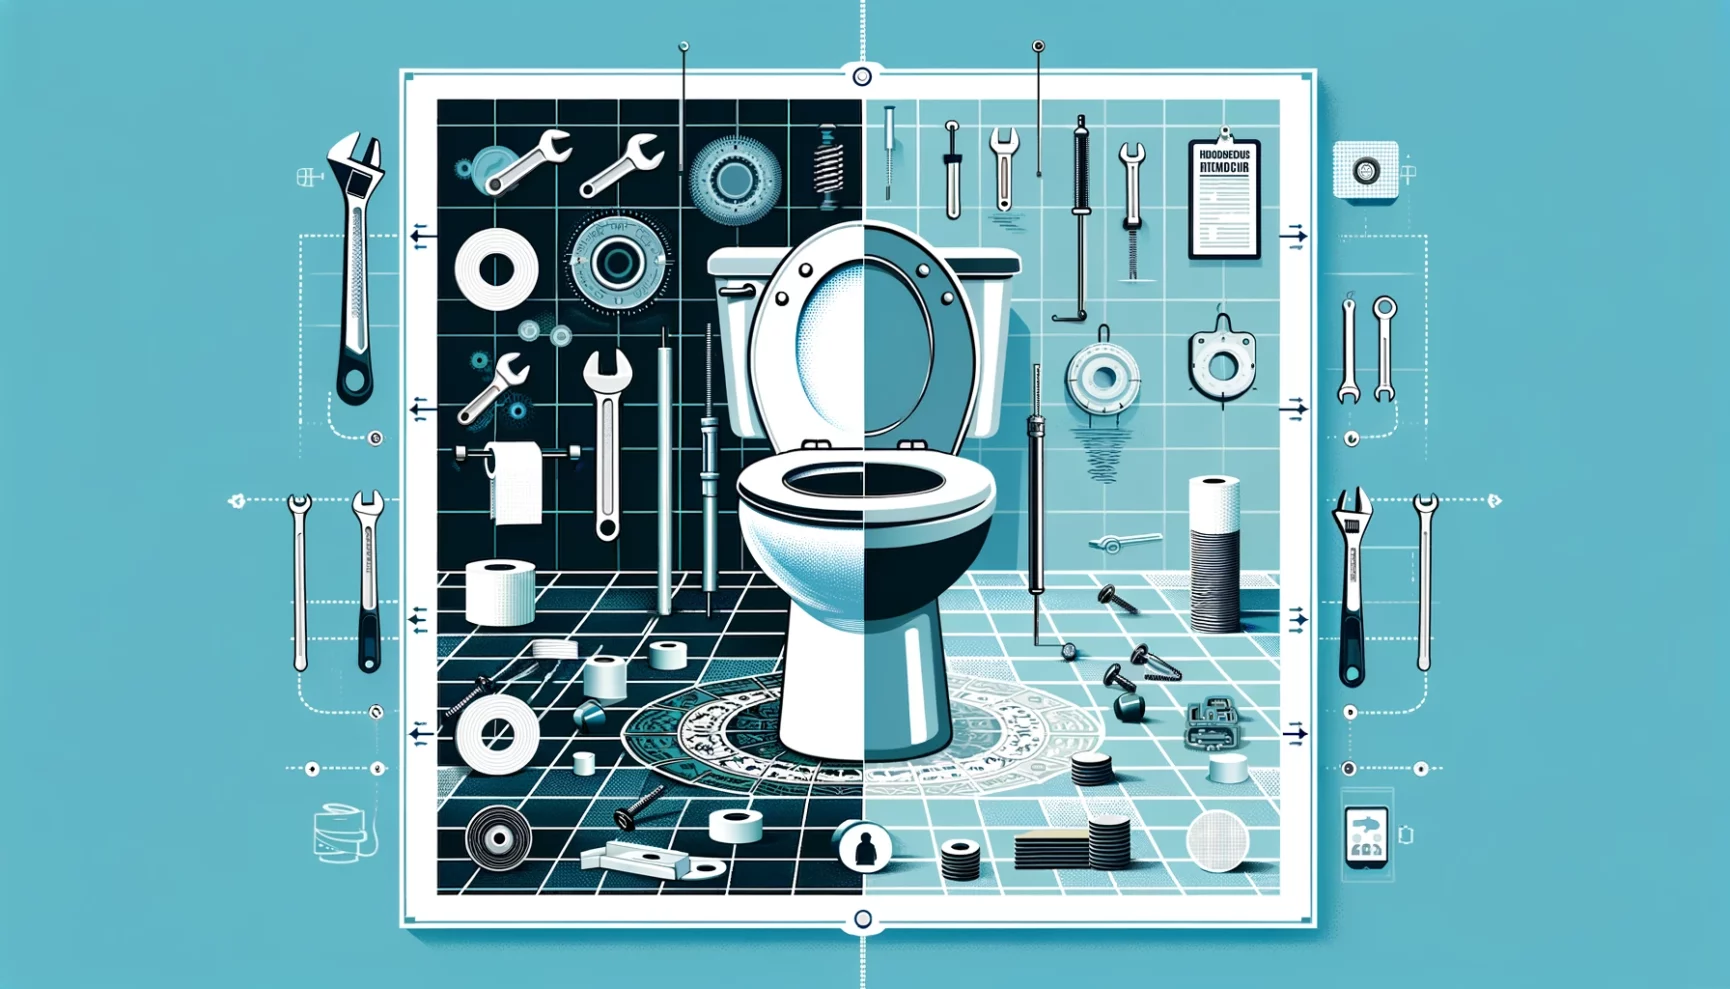 An illustration of a toilet with various plumbing tools and components arrayed around it in a schematic layout.